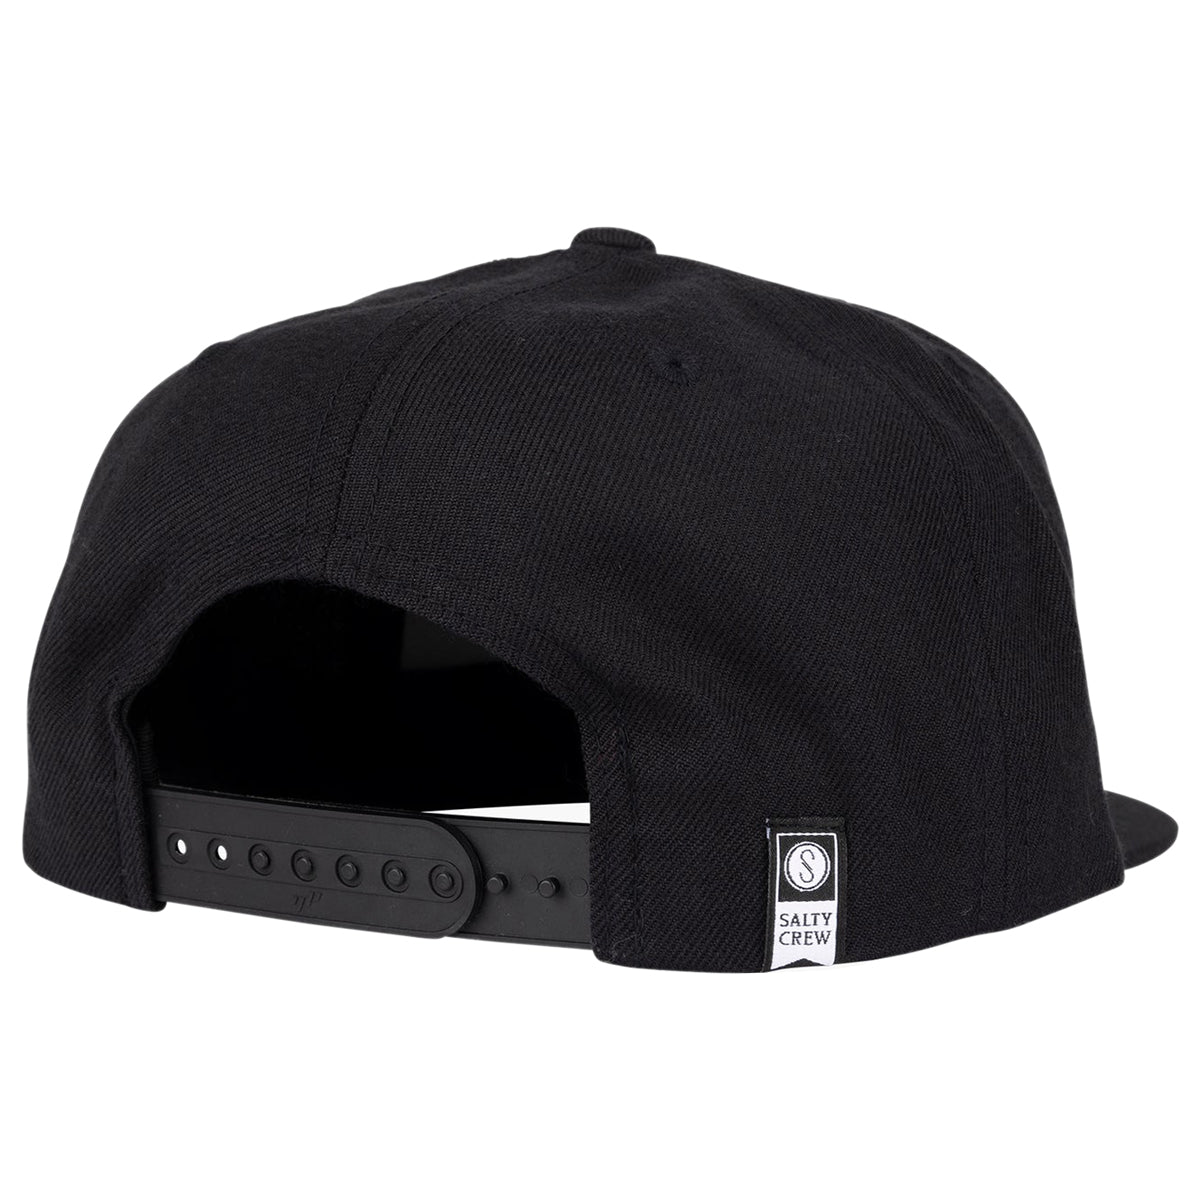 Salty Crew Rooster 6 Panel Hat - Black image 2